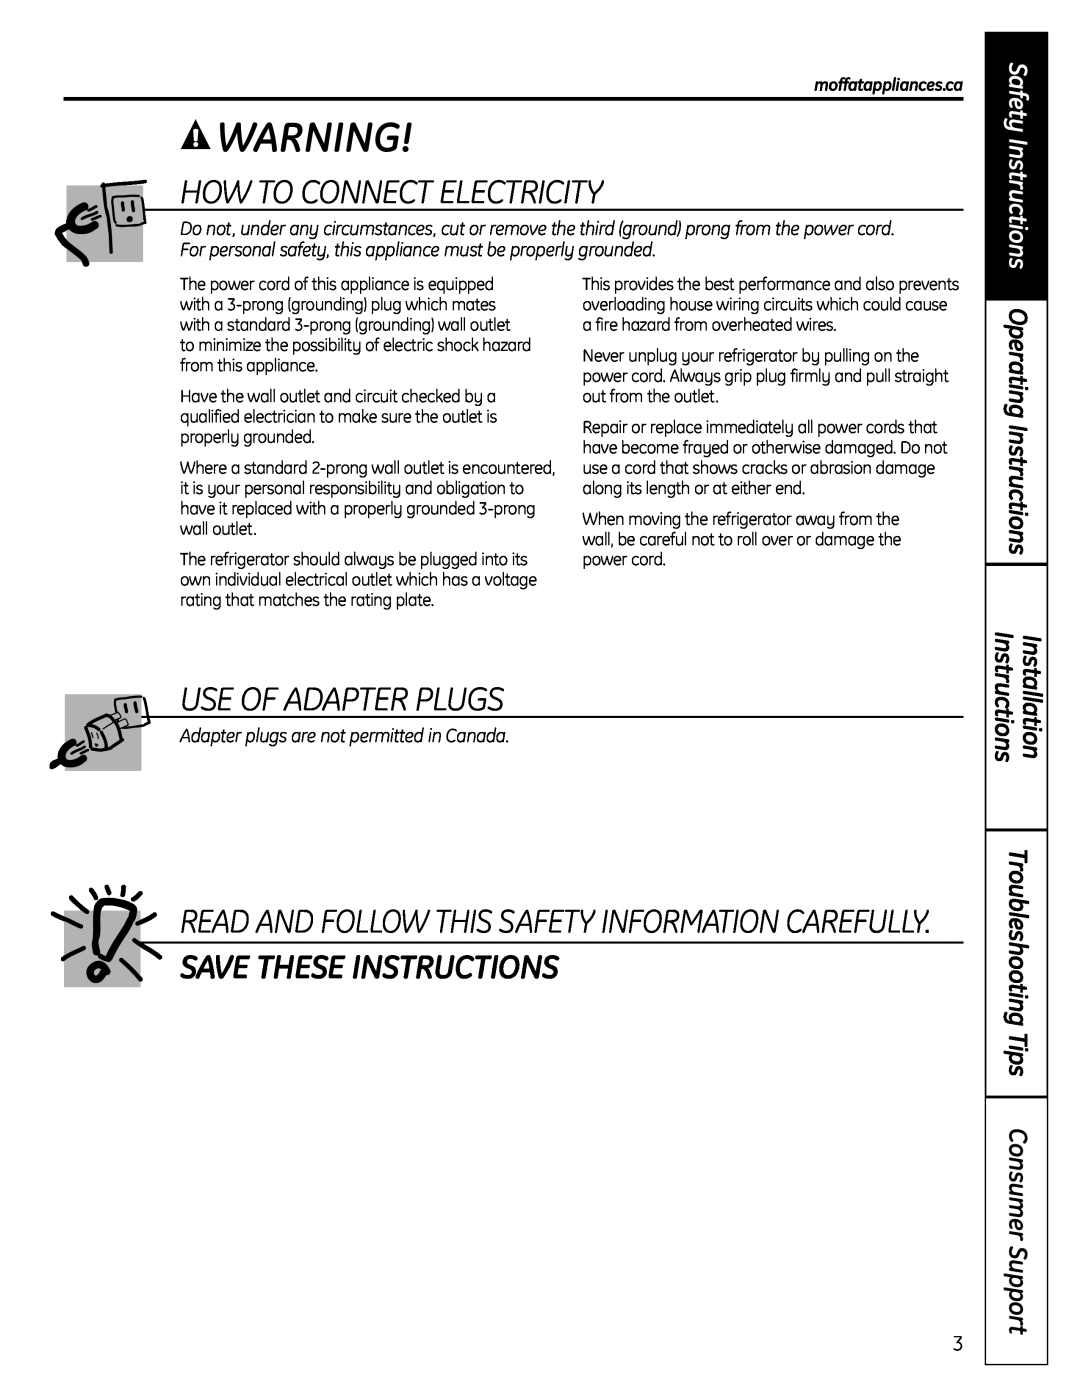 Moffat 20 How To Connect Electricity, Use Of Adapter Plugs, Save These Instructions, Operating Instructions, Installation 